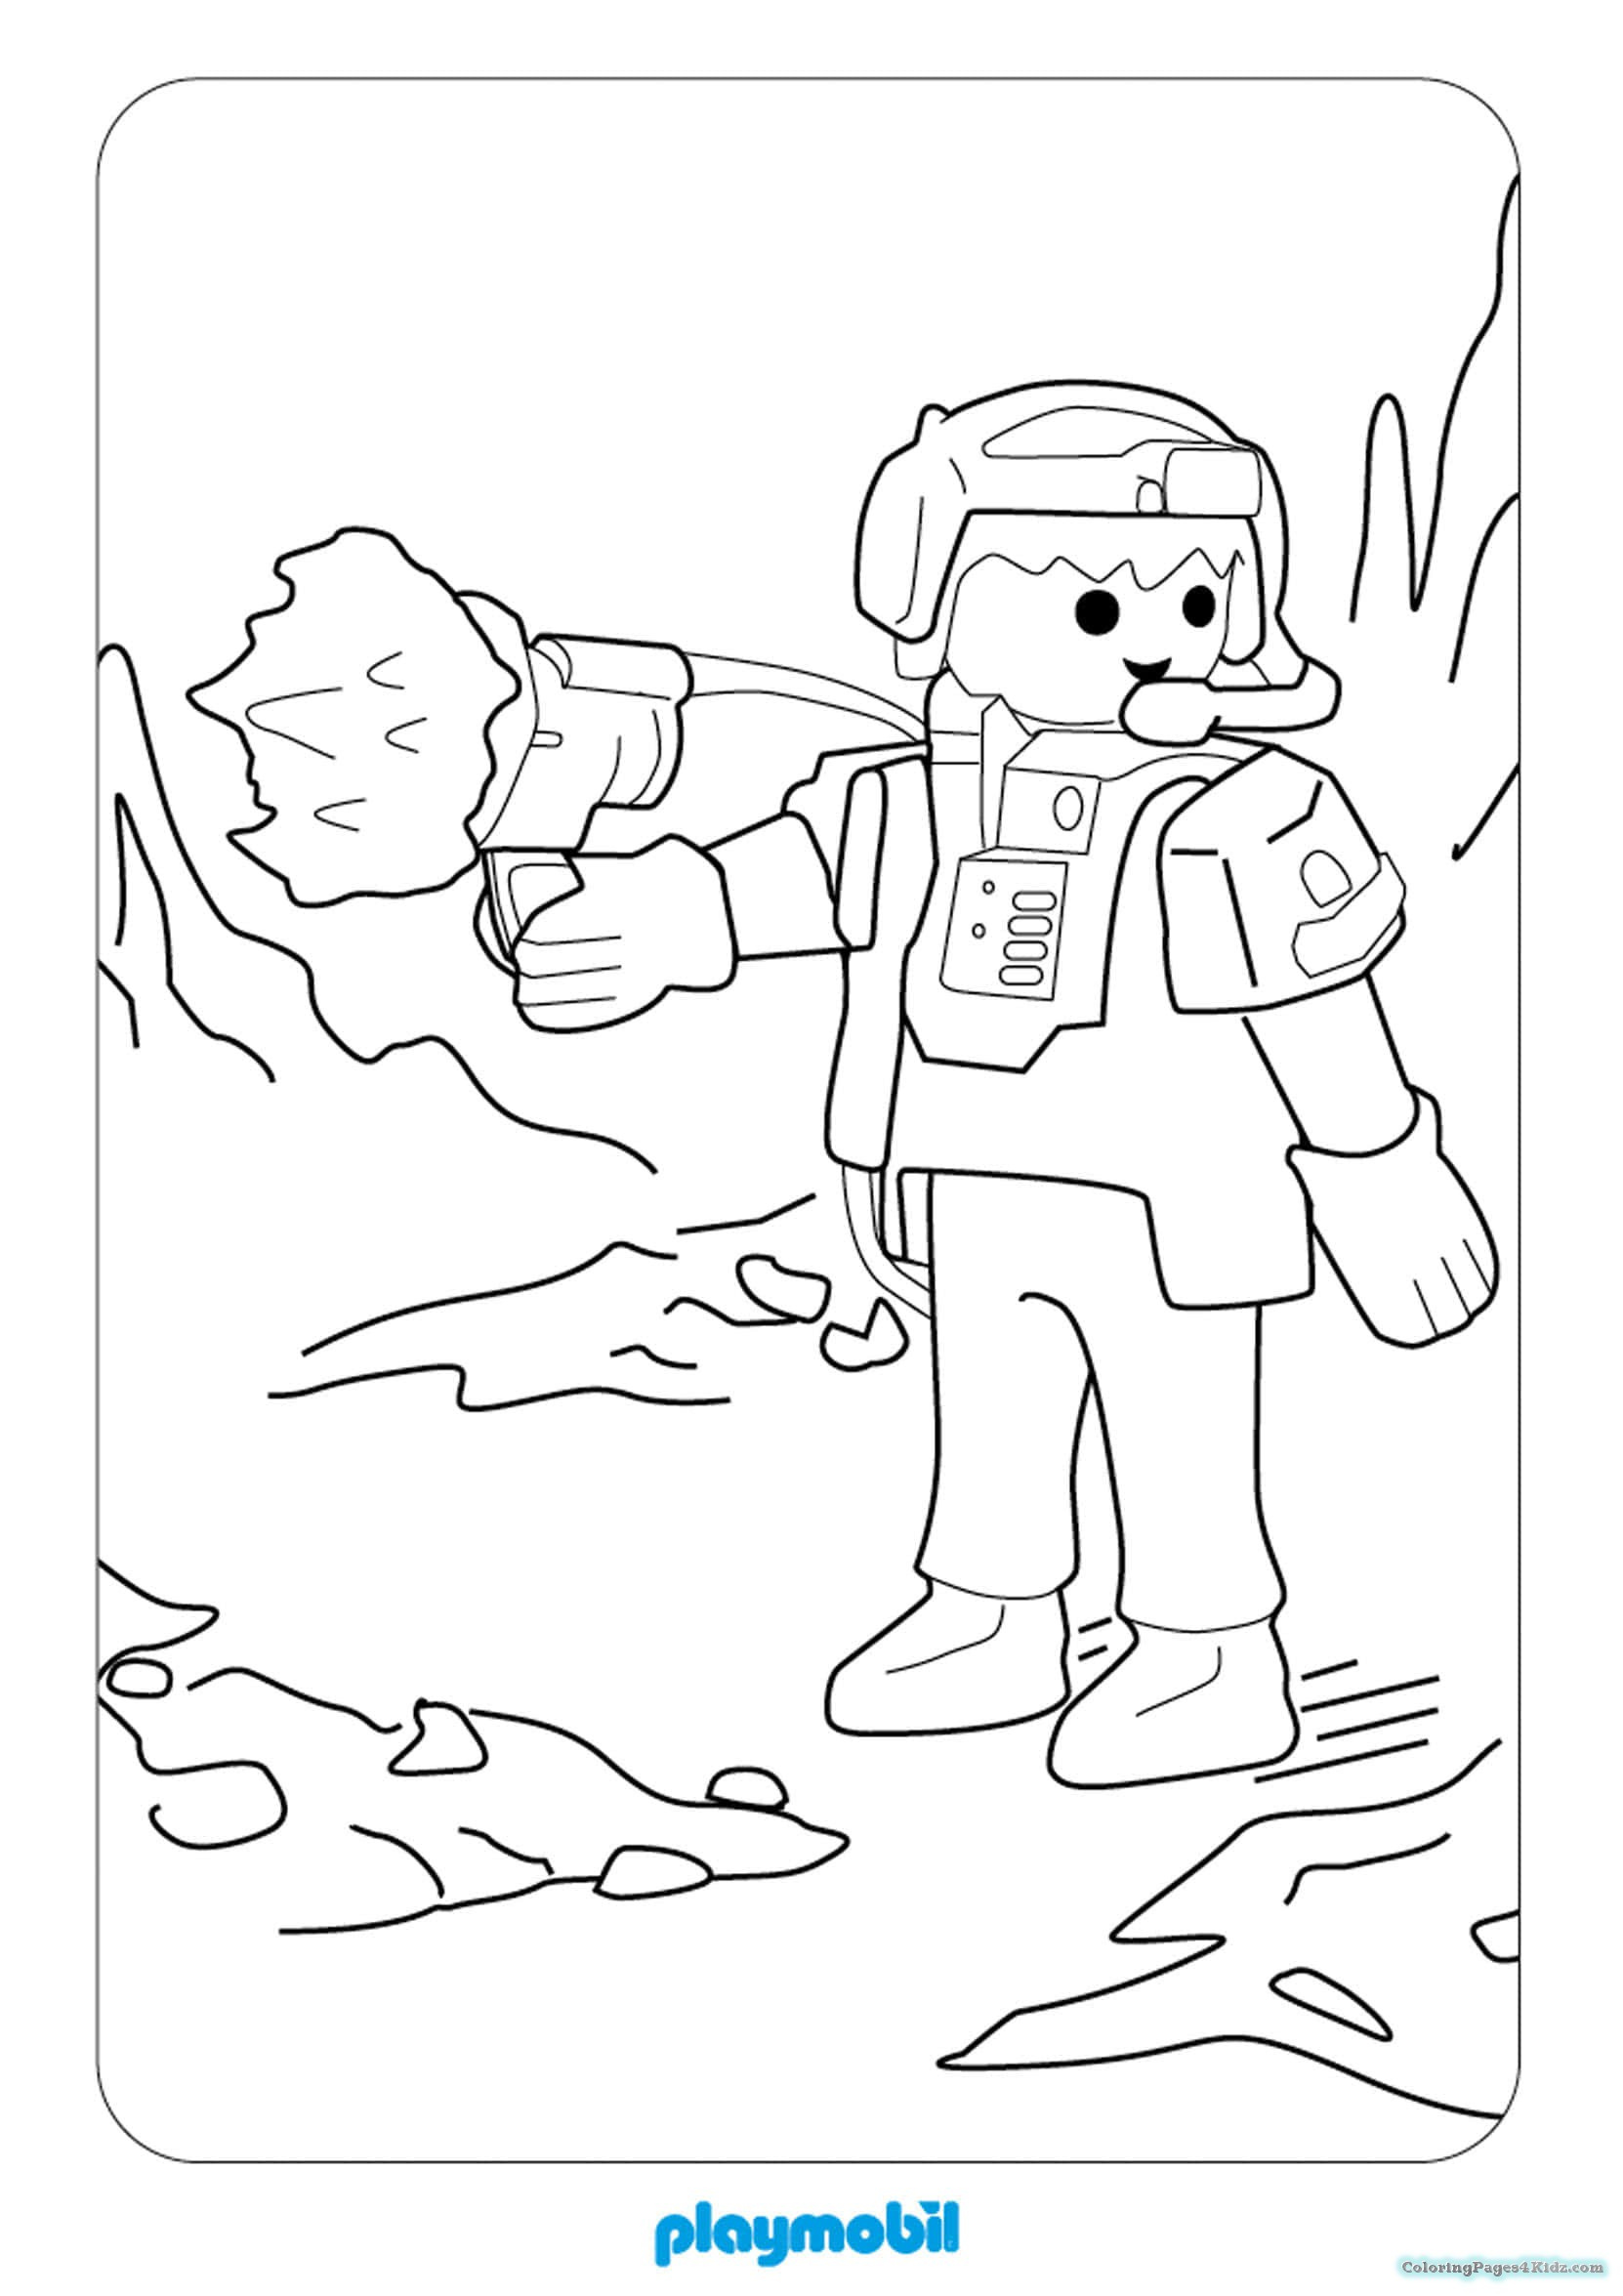 playmobil coloring pages 1017